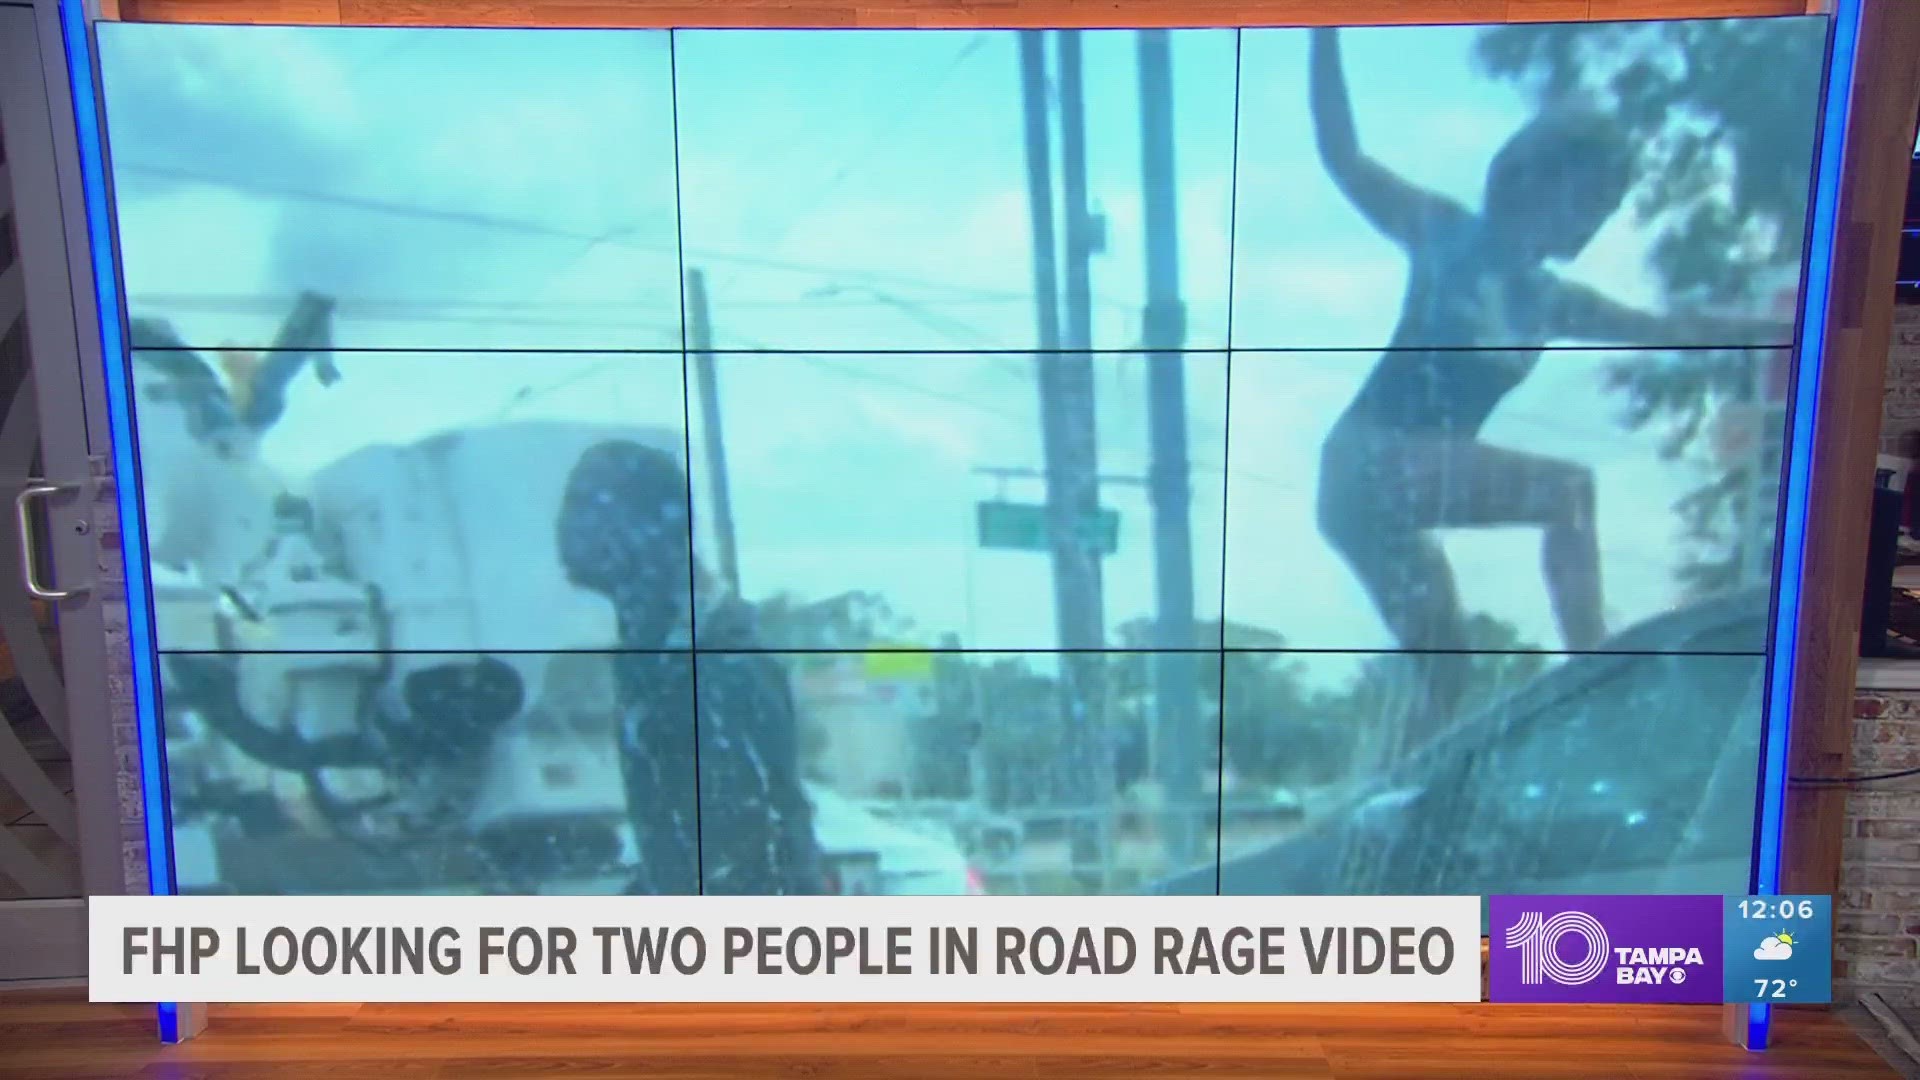 Fhp Man Woman Seen In Video Attacking Persons Car In Road Rage Incident 6246